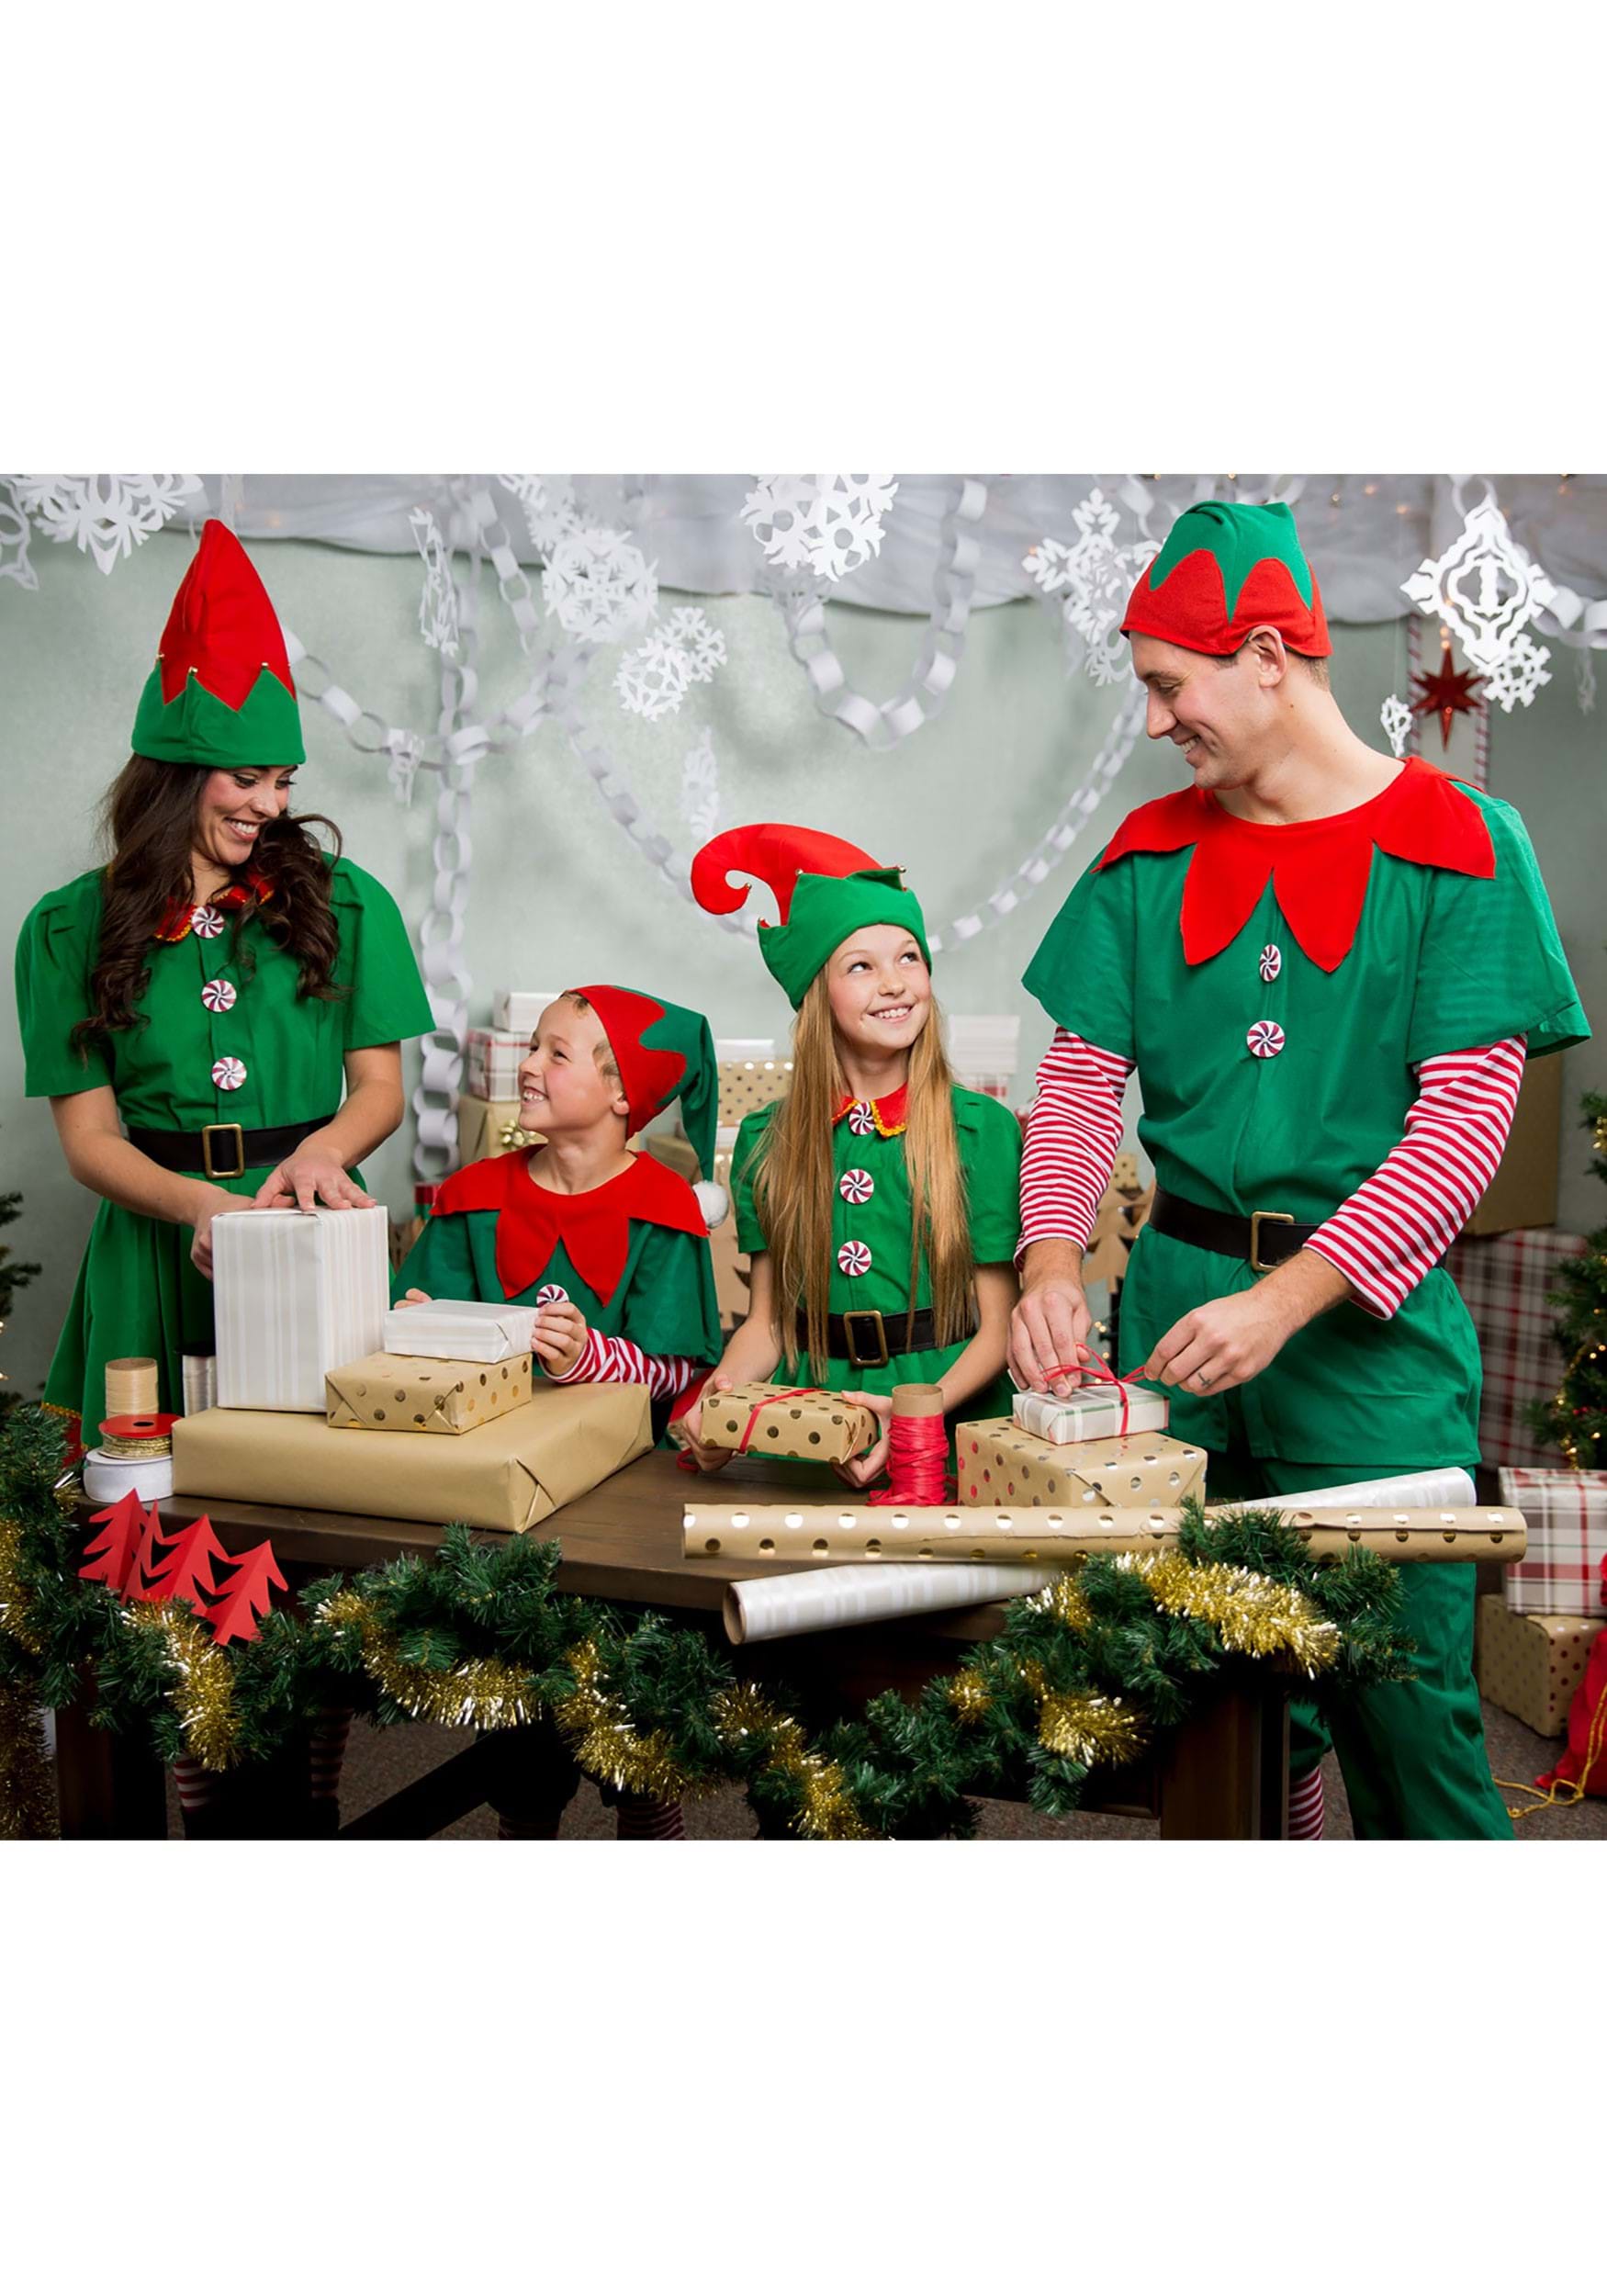 Plus Size Holiday Elf Costume For Women